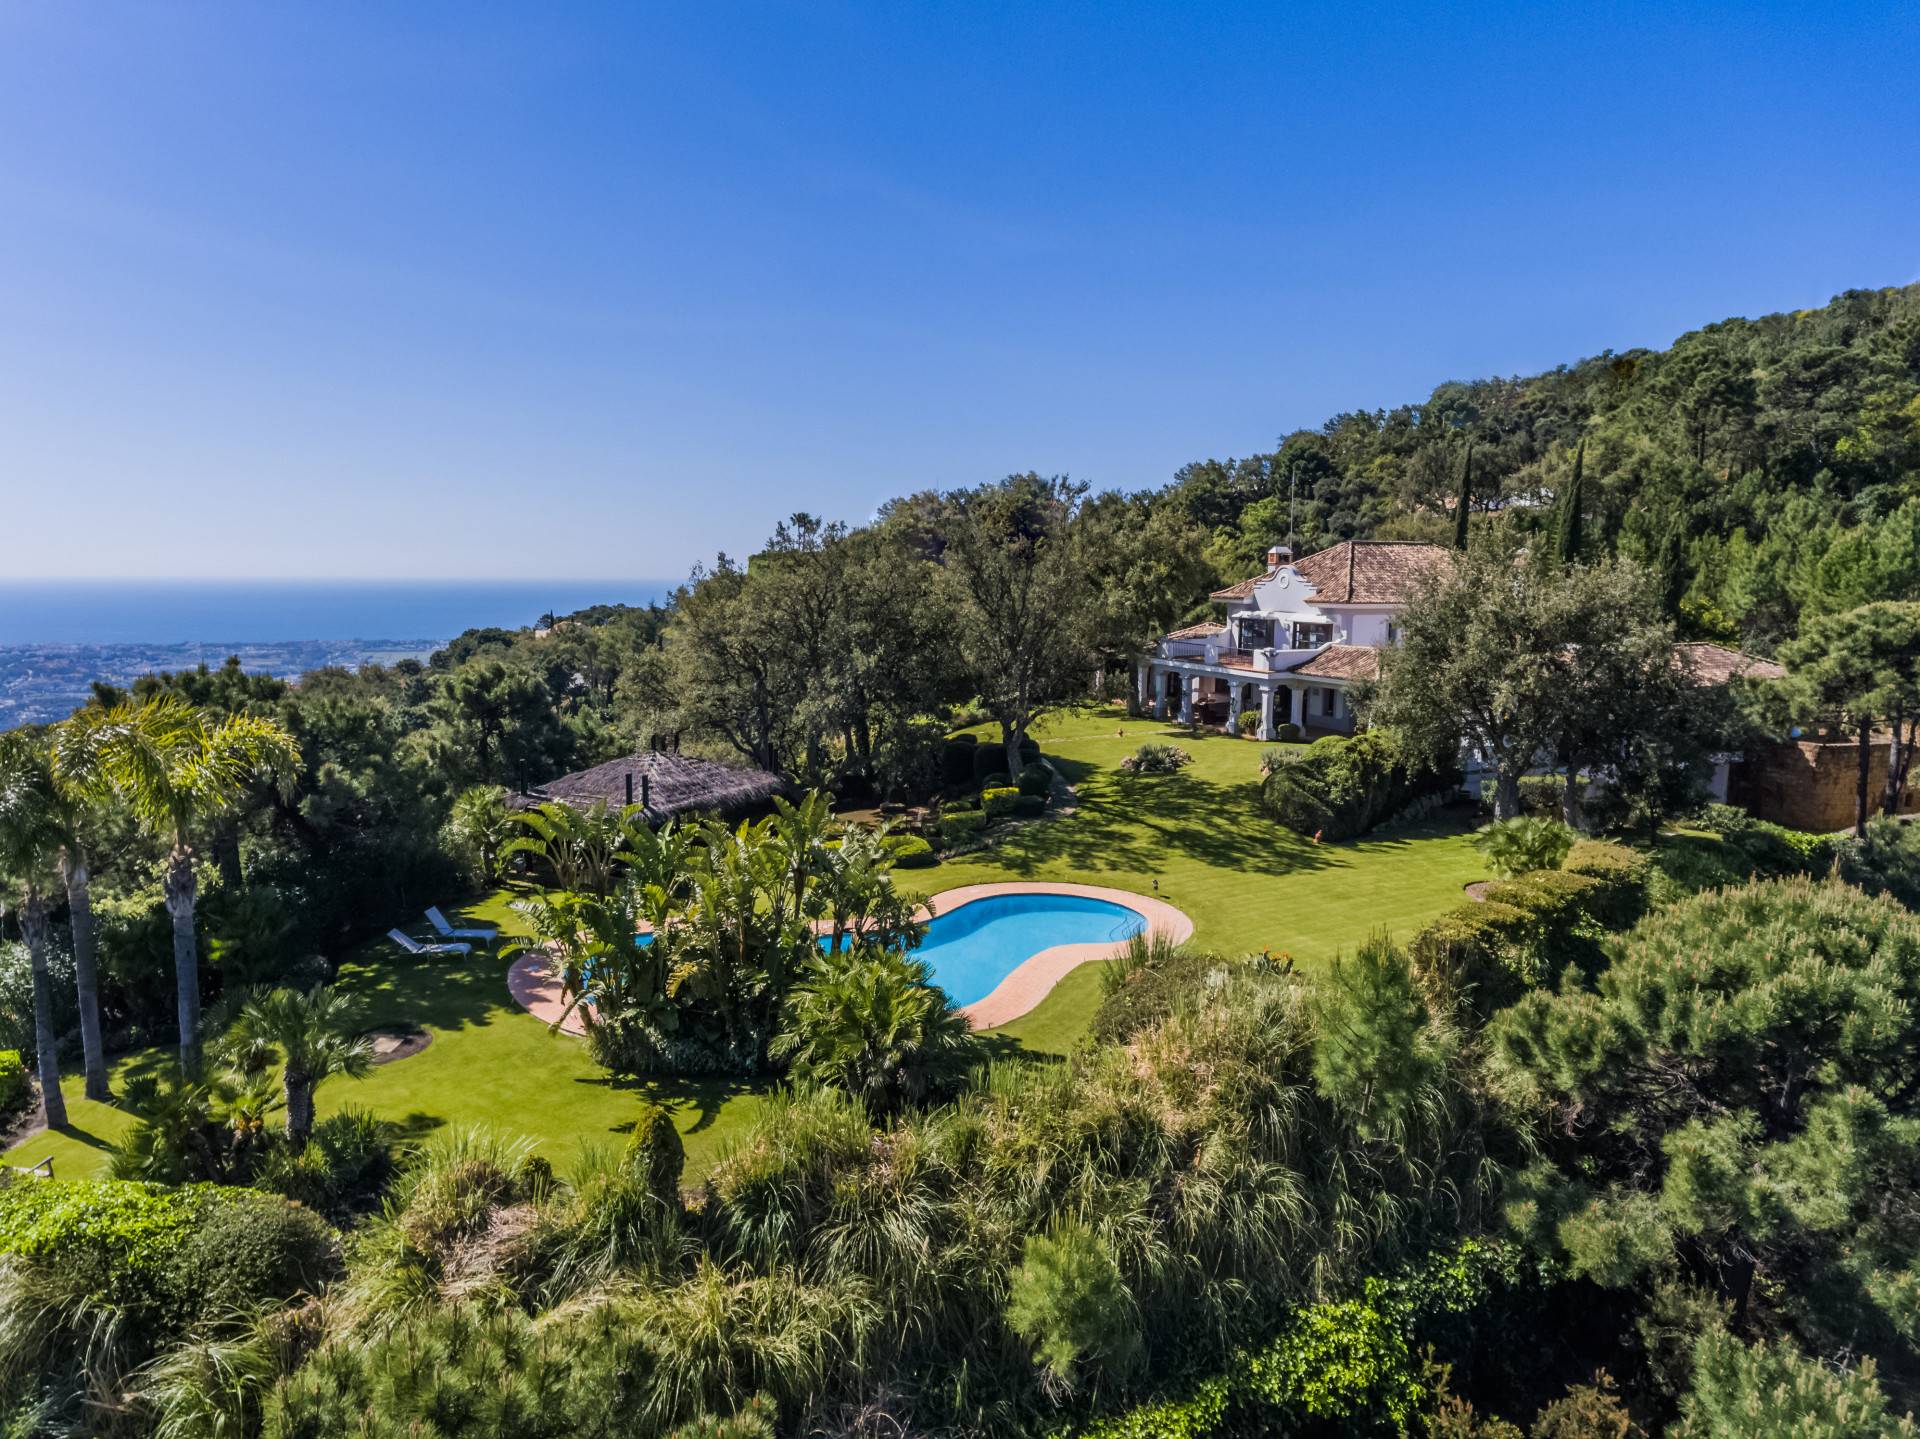 This mediterranean style villa is situated in La Zagaleta a world class exclusive gated community with 24 hours security, exceptional standards, design and high qualities.